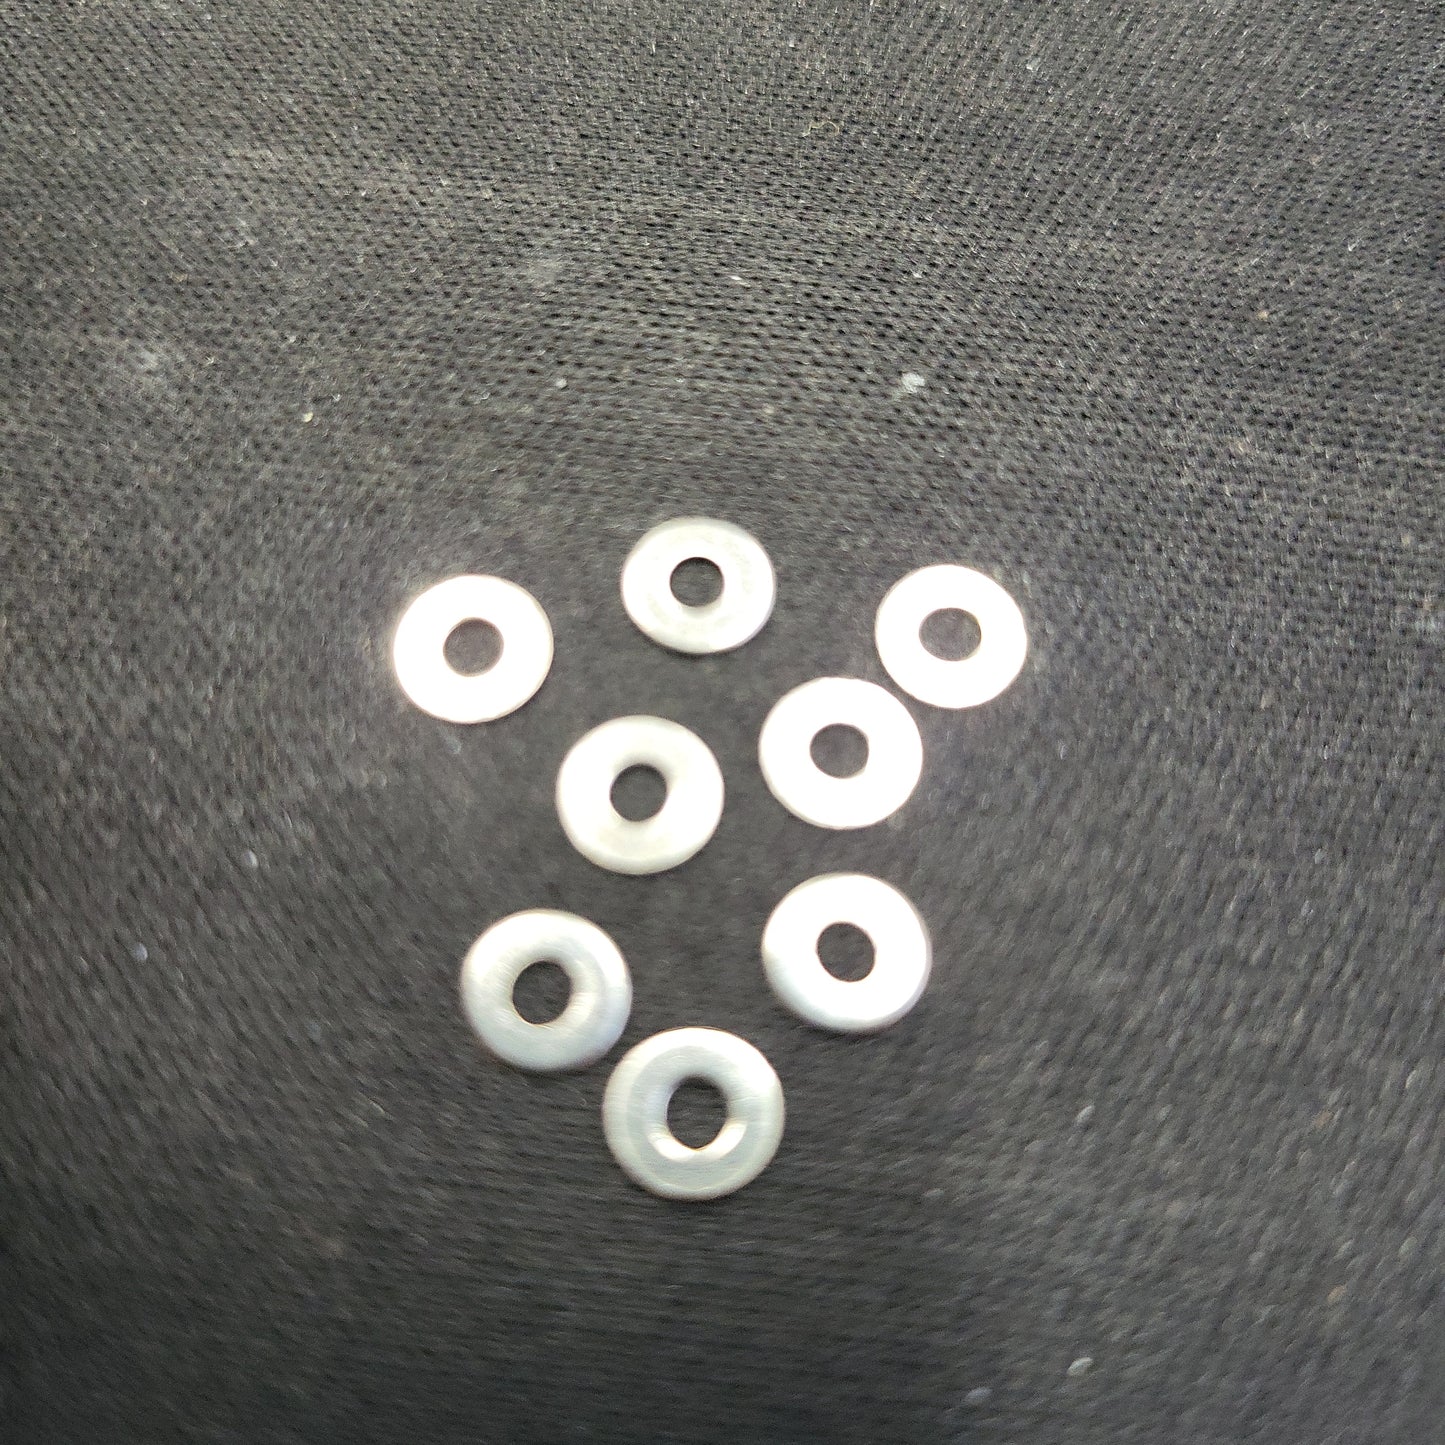 M2 Hardware, Screws / washers for motor mount or other stuff